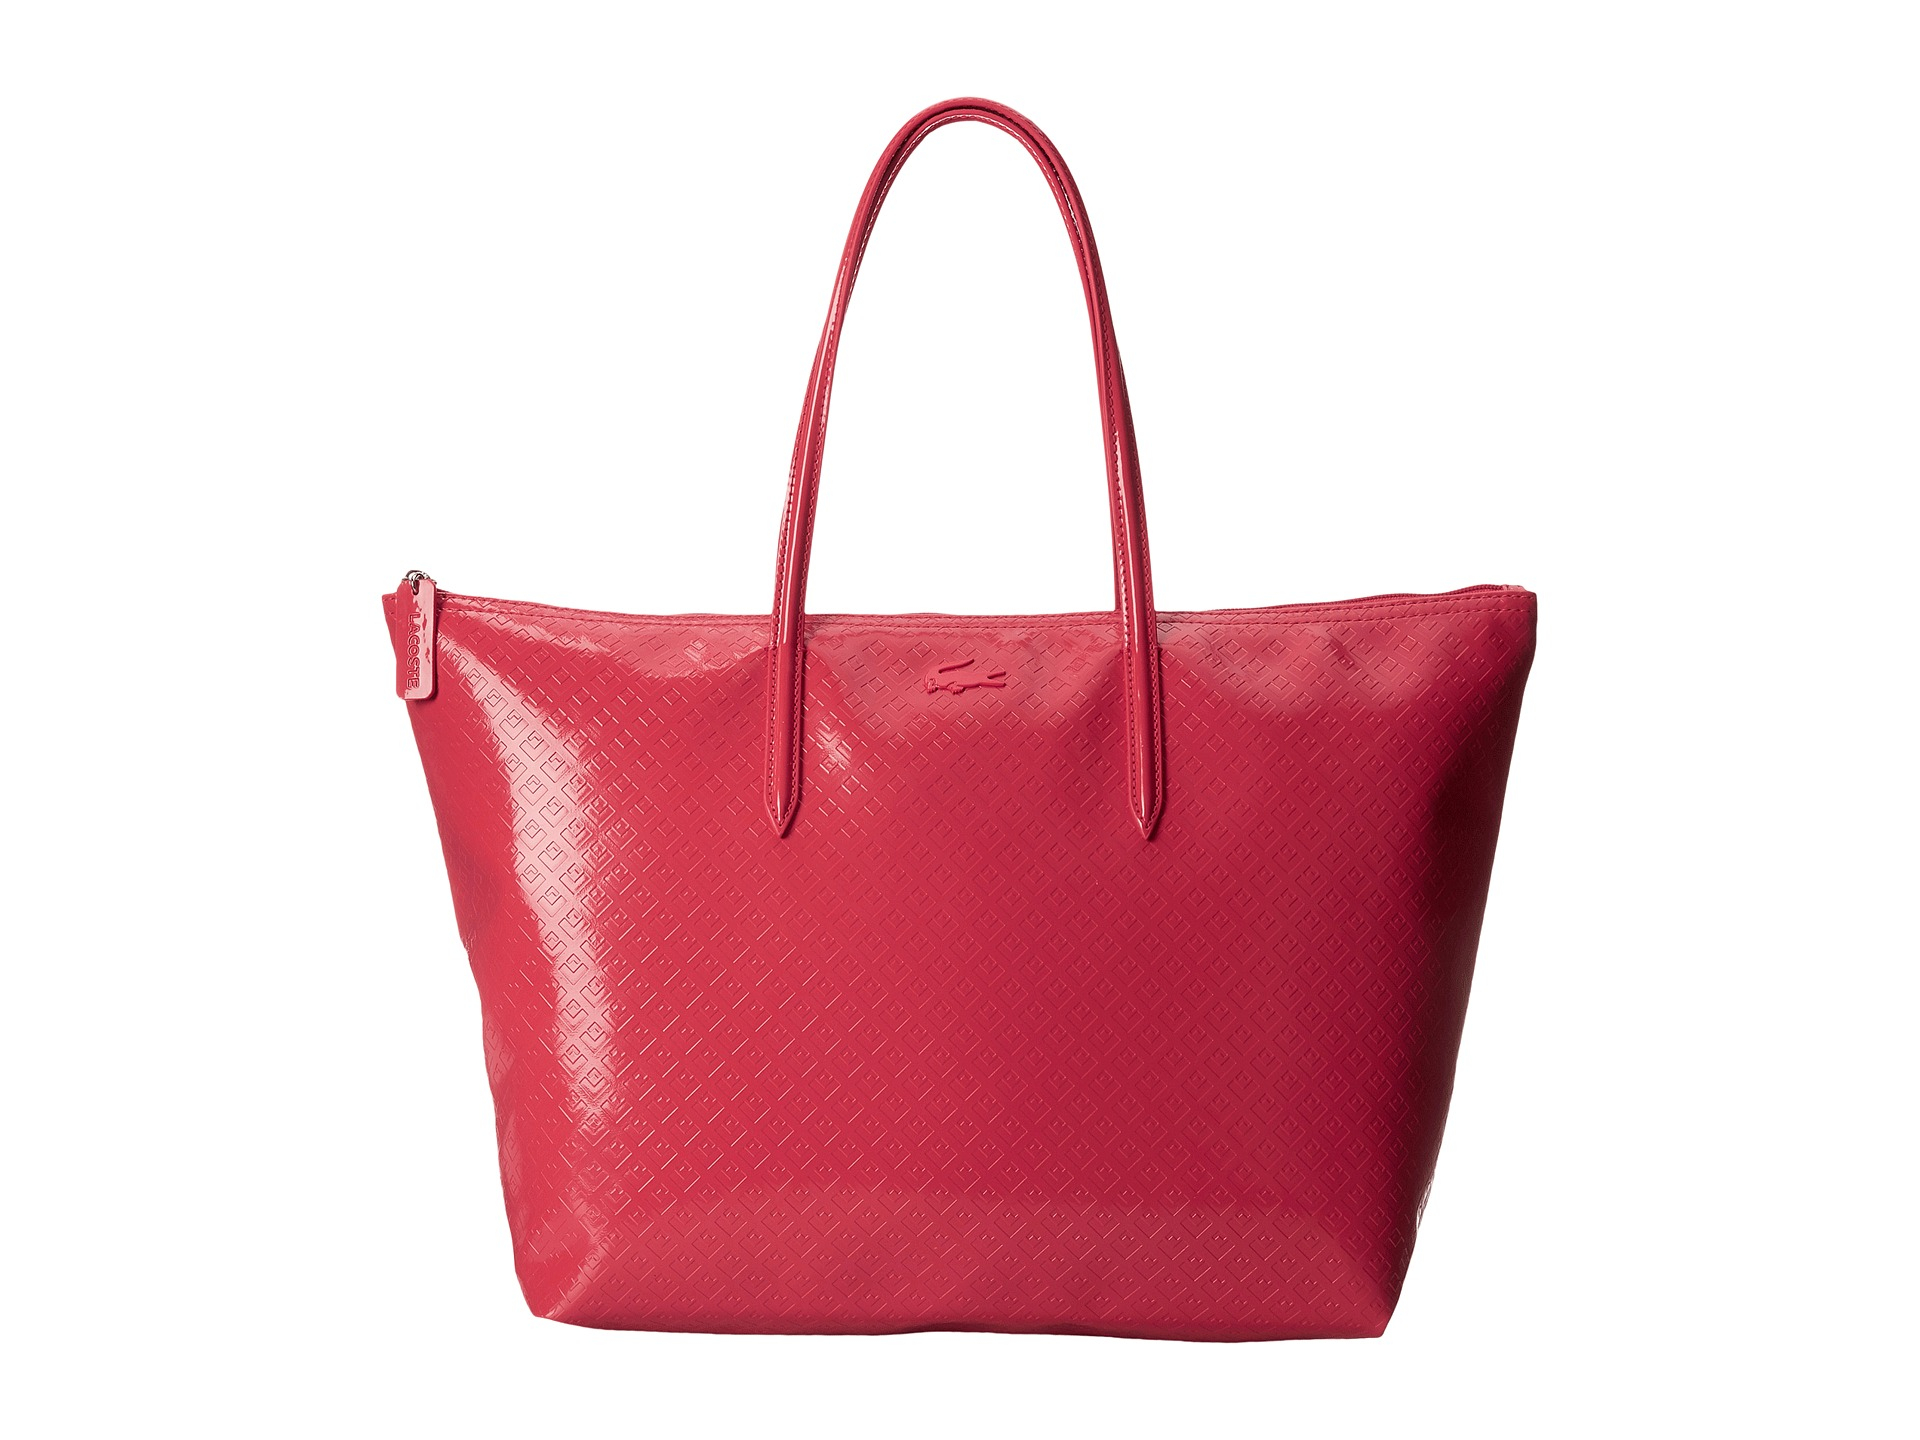 Download Lyst - Lacoste L.12.12 Glossy Large Shopping Bag in Pink